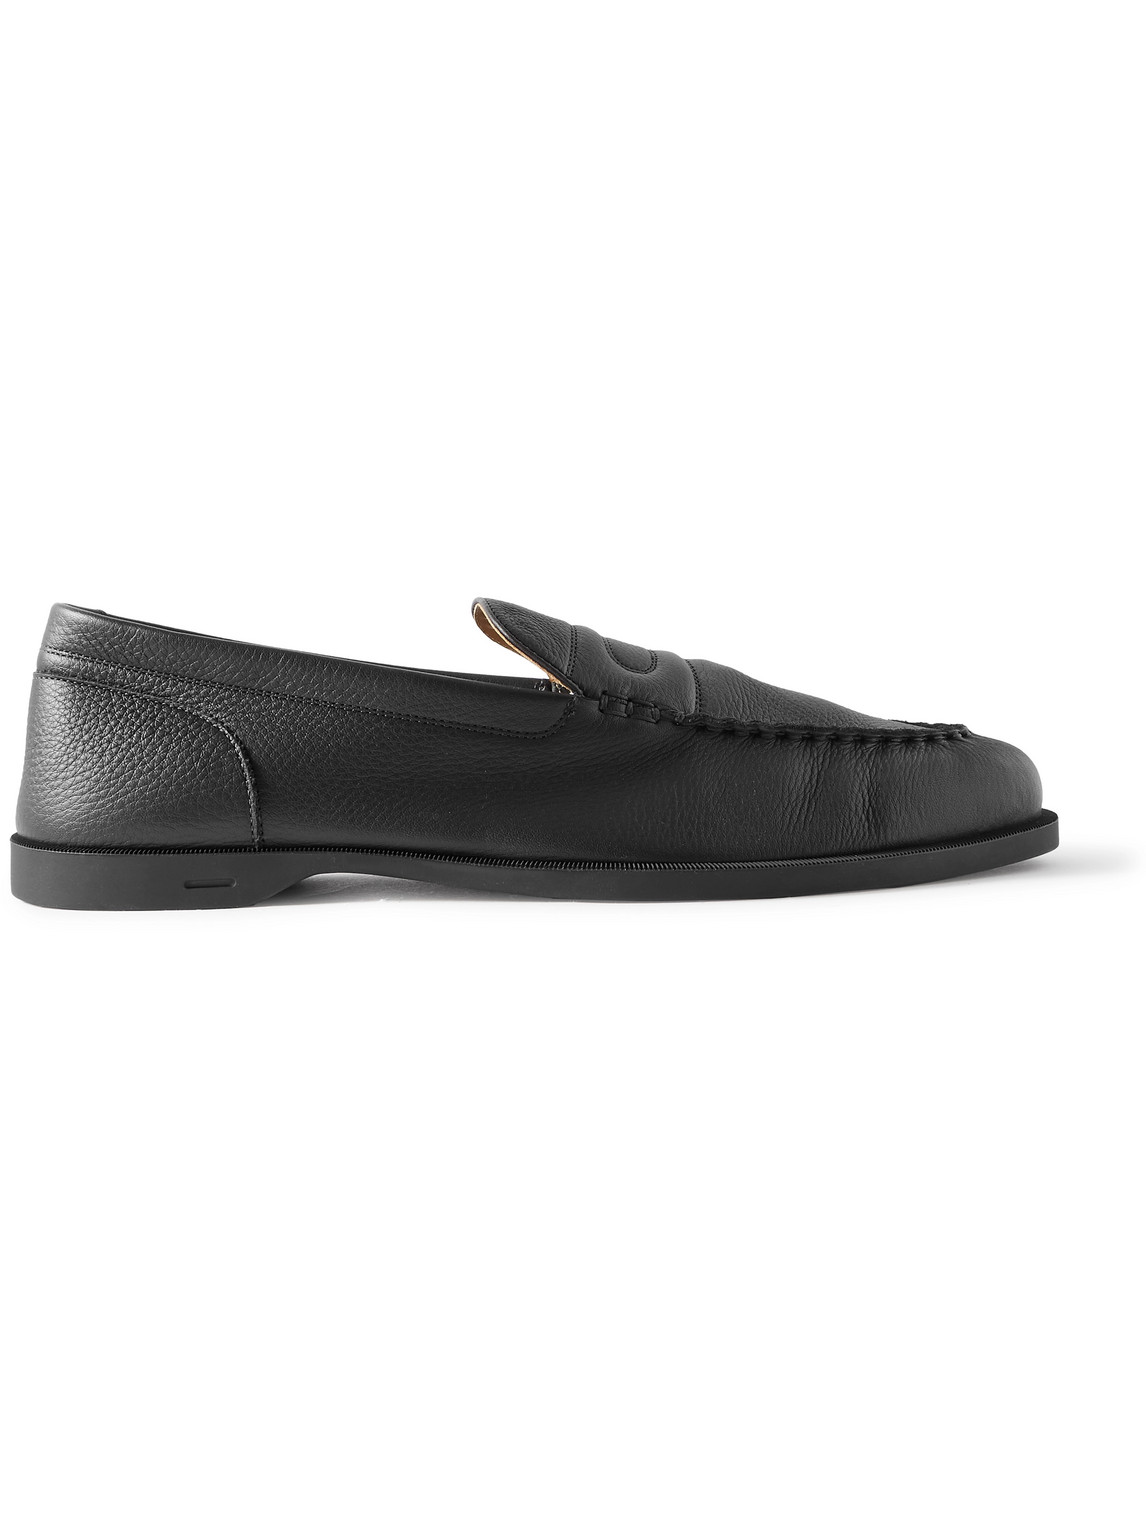 Pace Full-Grain Leather Loafers